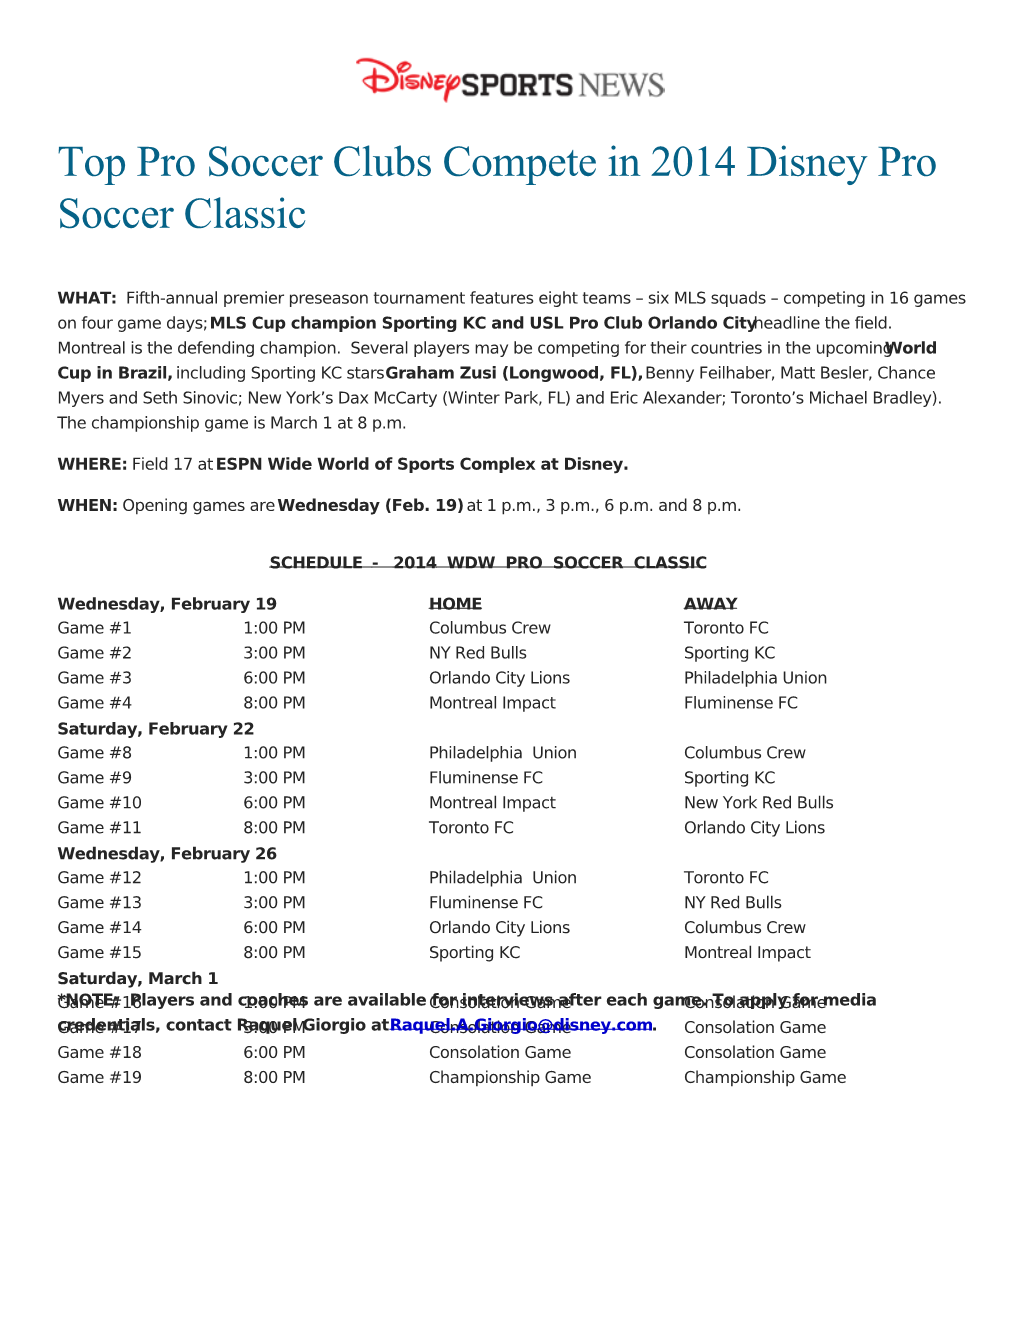 Top Pro Soccer Clubs Compete in 2014 Disney Pro Soccer Classic